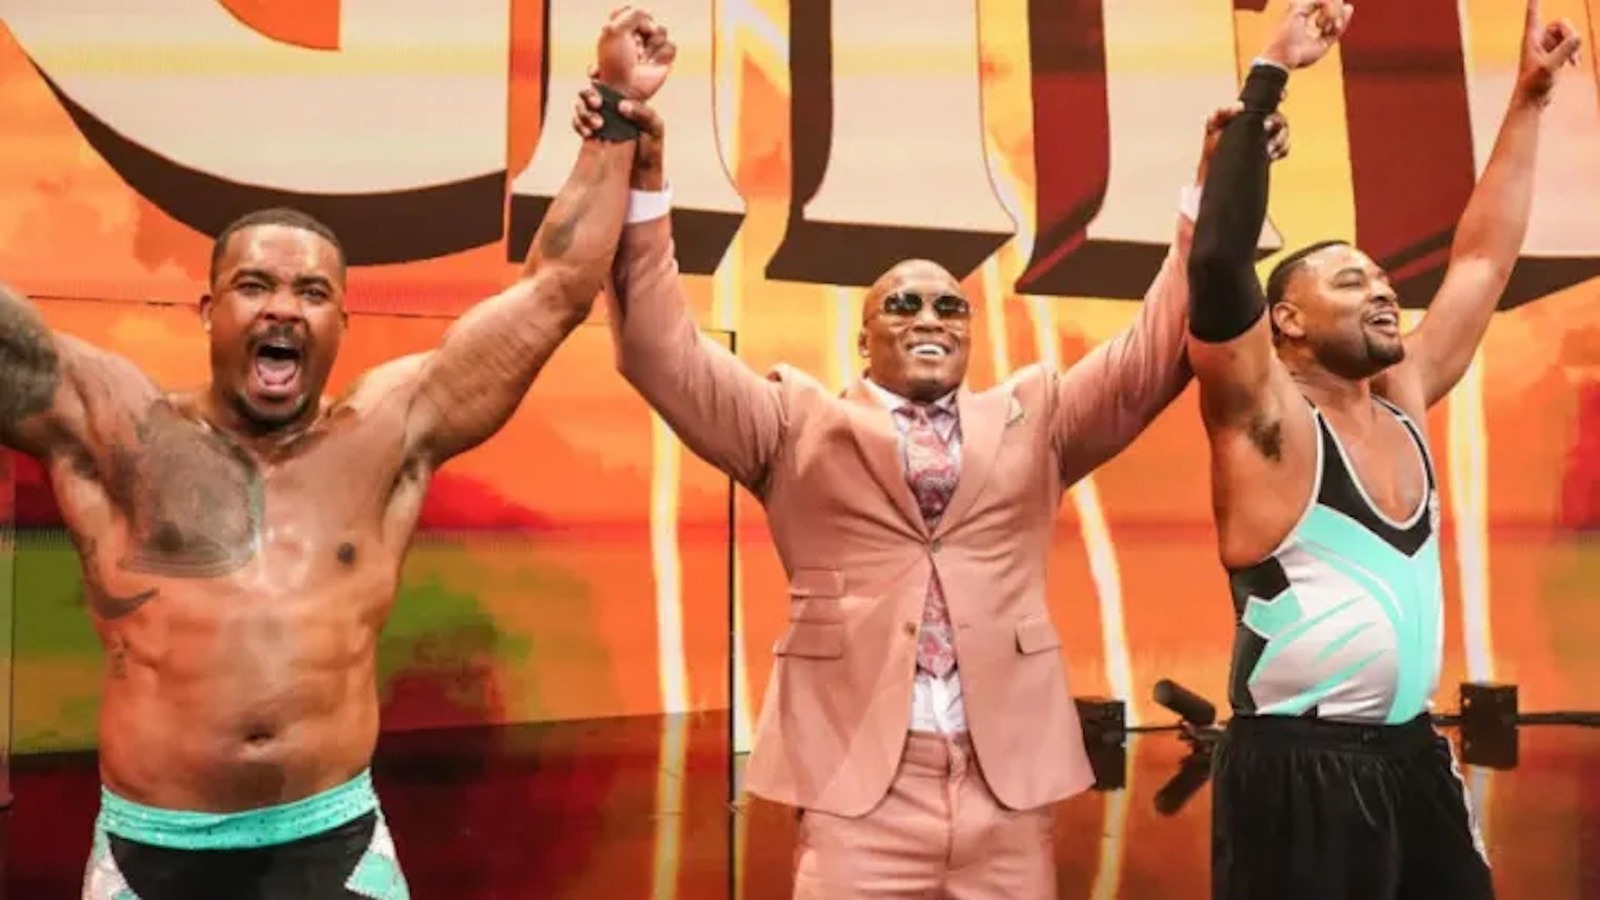 The Pride Pick Up WWE WrestleMania 40 Win Alongside Bubba Ray Dudley, Snoop Dogg